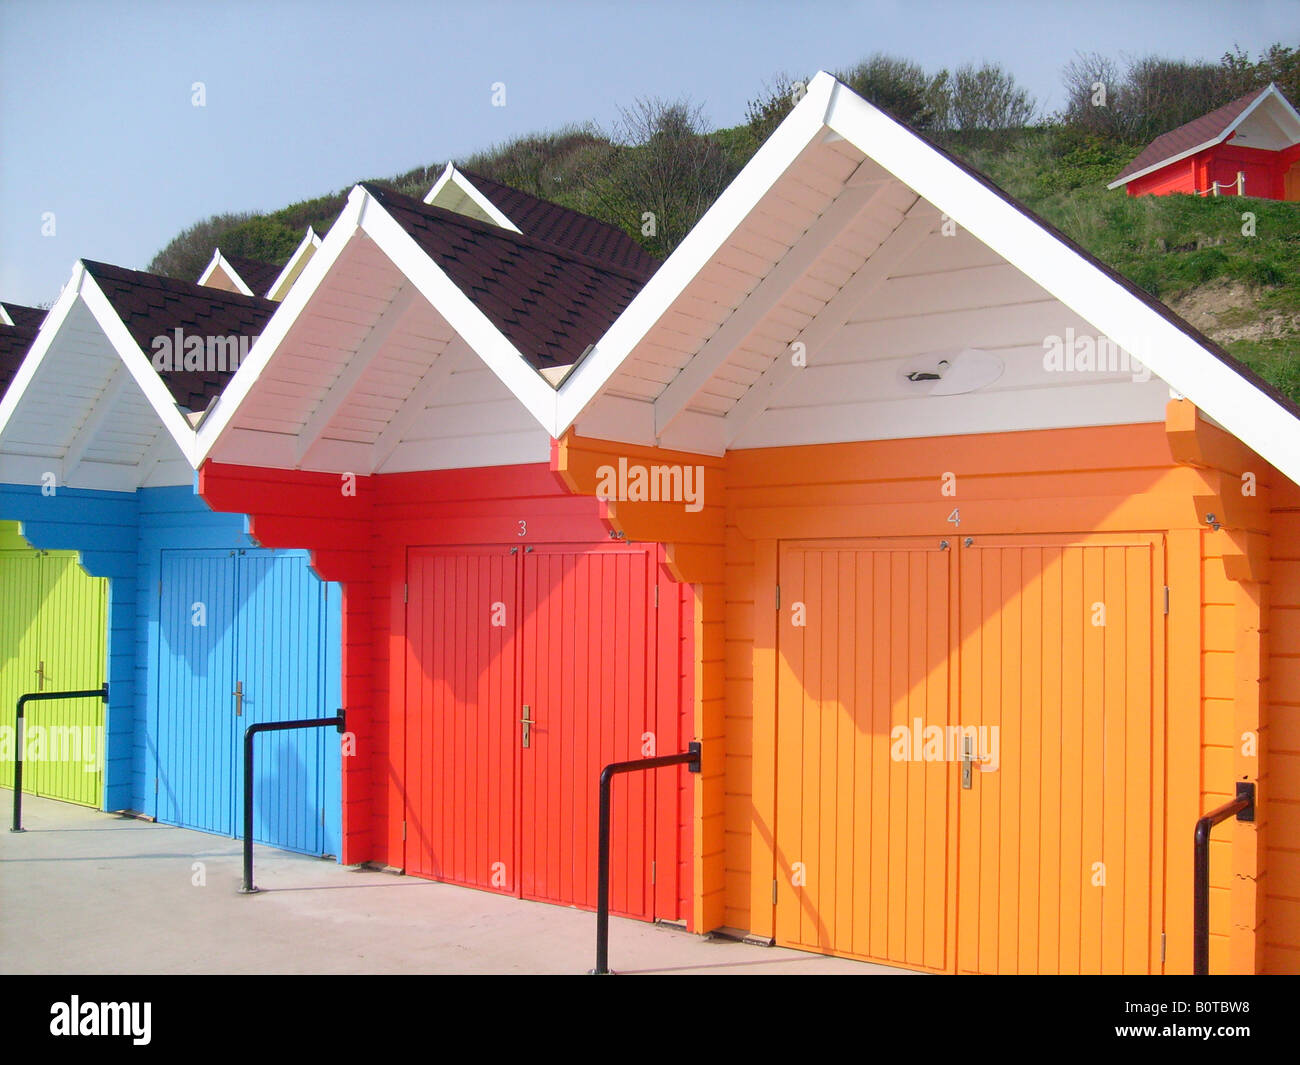 Seaside beach chalets aux couleurs lumineuses, Scarborugh North Bay, Angleterre. Banque D'Images